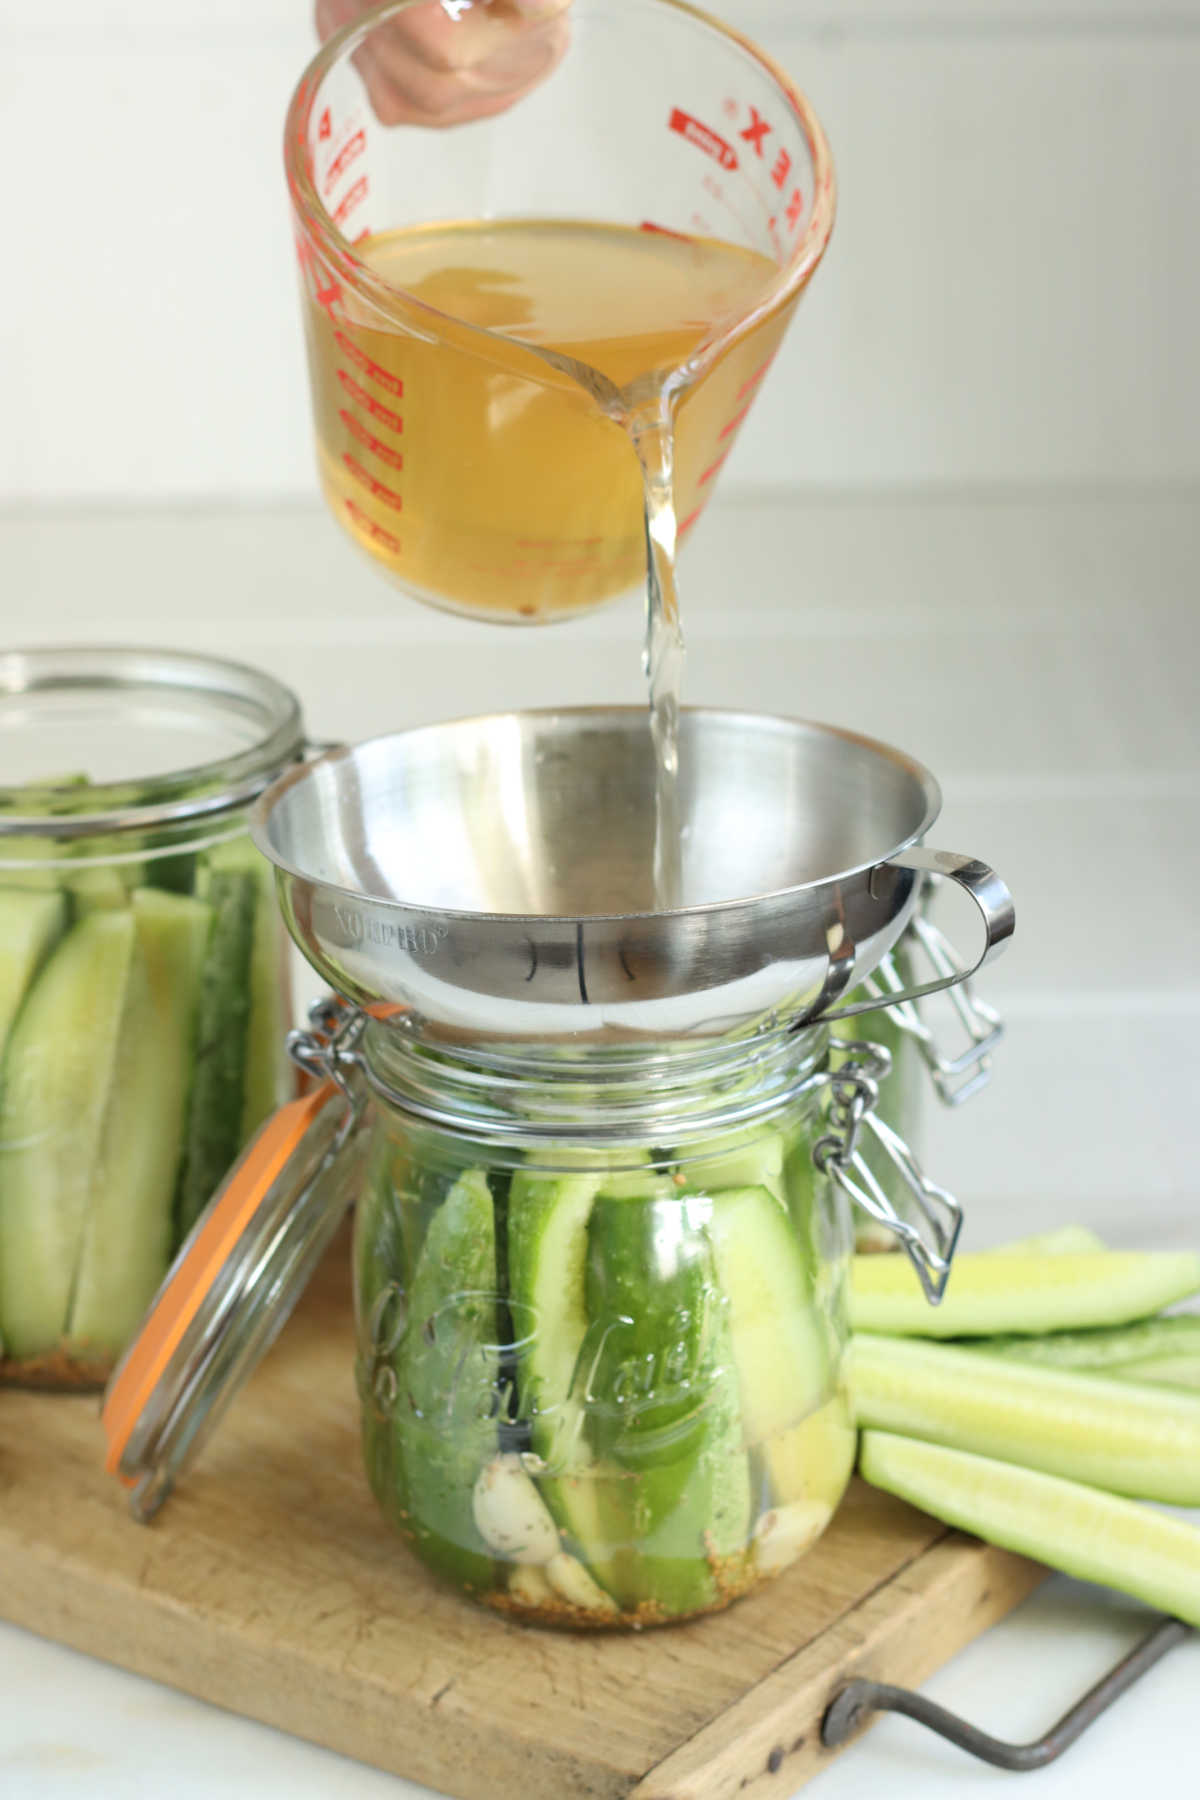 Pouring pickling brine over dill pickles in glass jar on wooden cutting board.